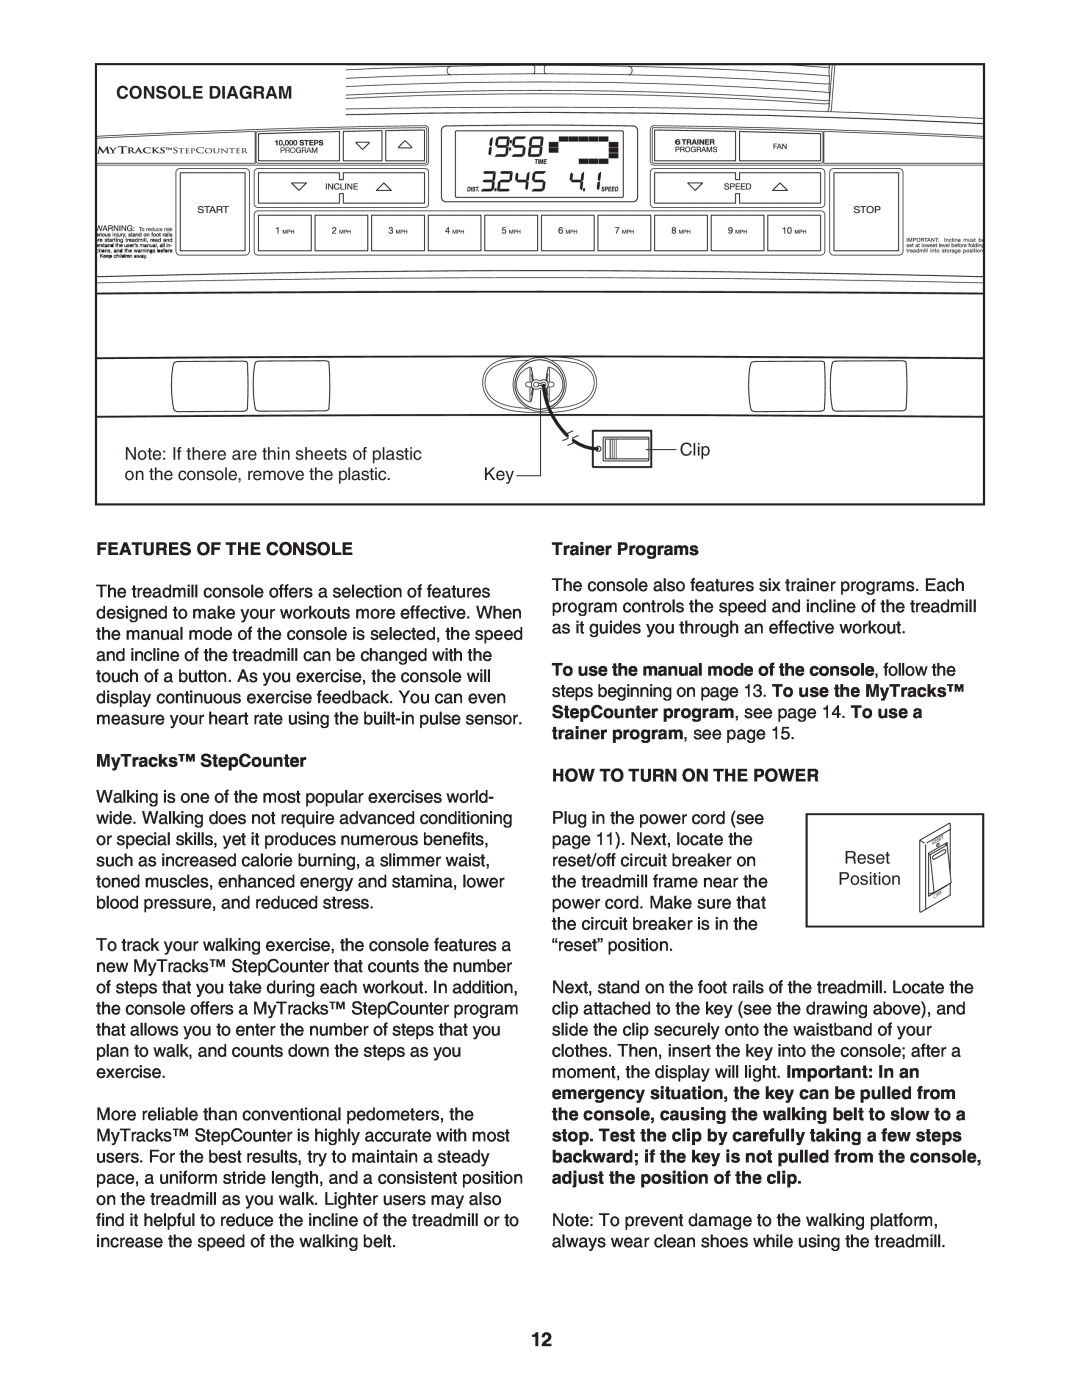 Image IMTL49105.0 user manual Console Diagram, Features Of The Console, MyTracks StepCounter, Trainer Programs 